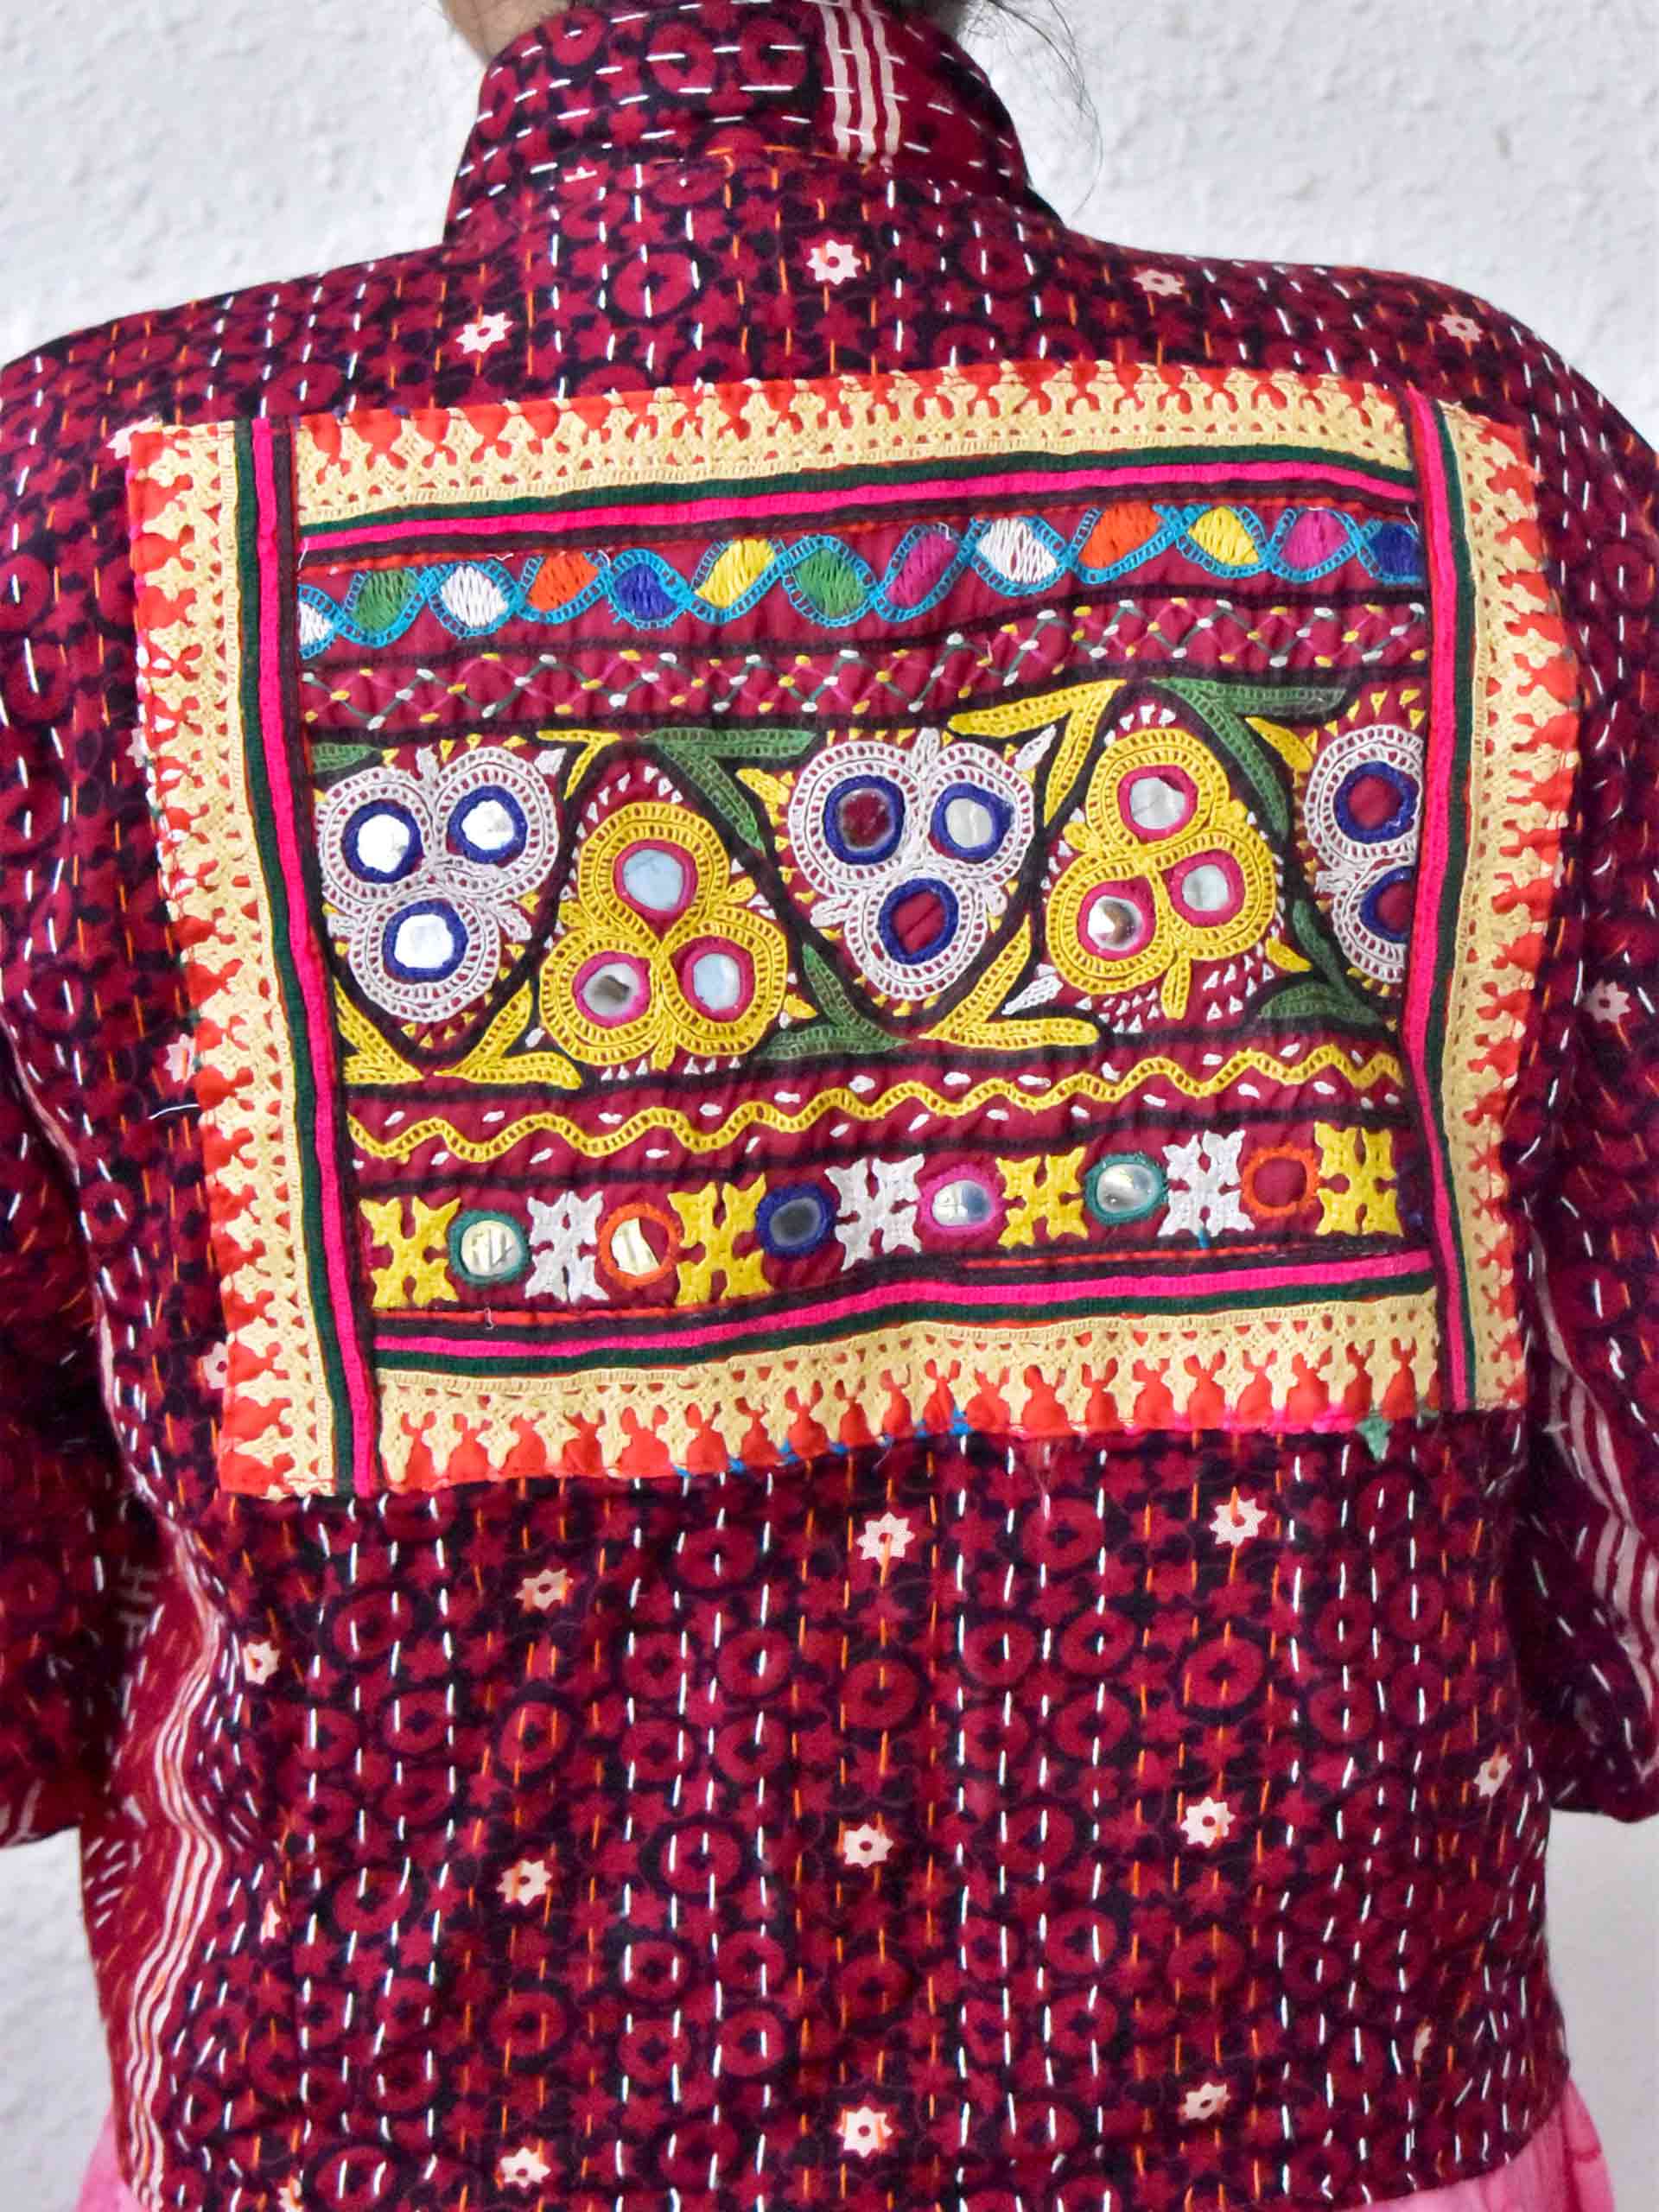 Mosiki - hand embroidered Reversible jacket